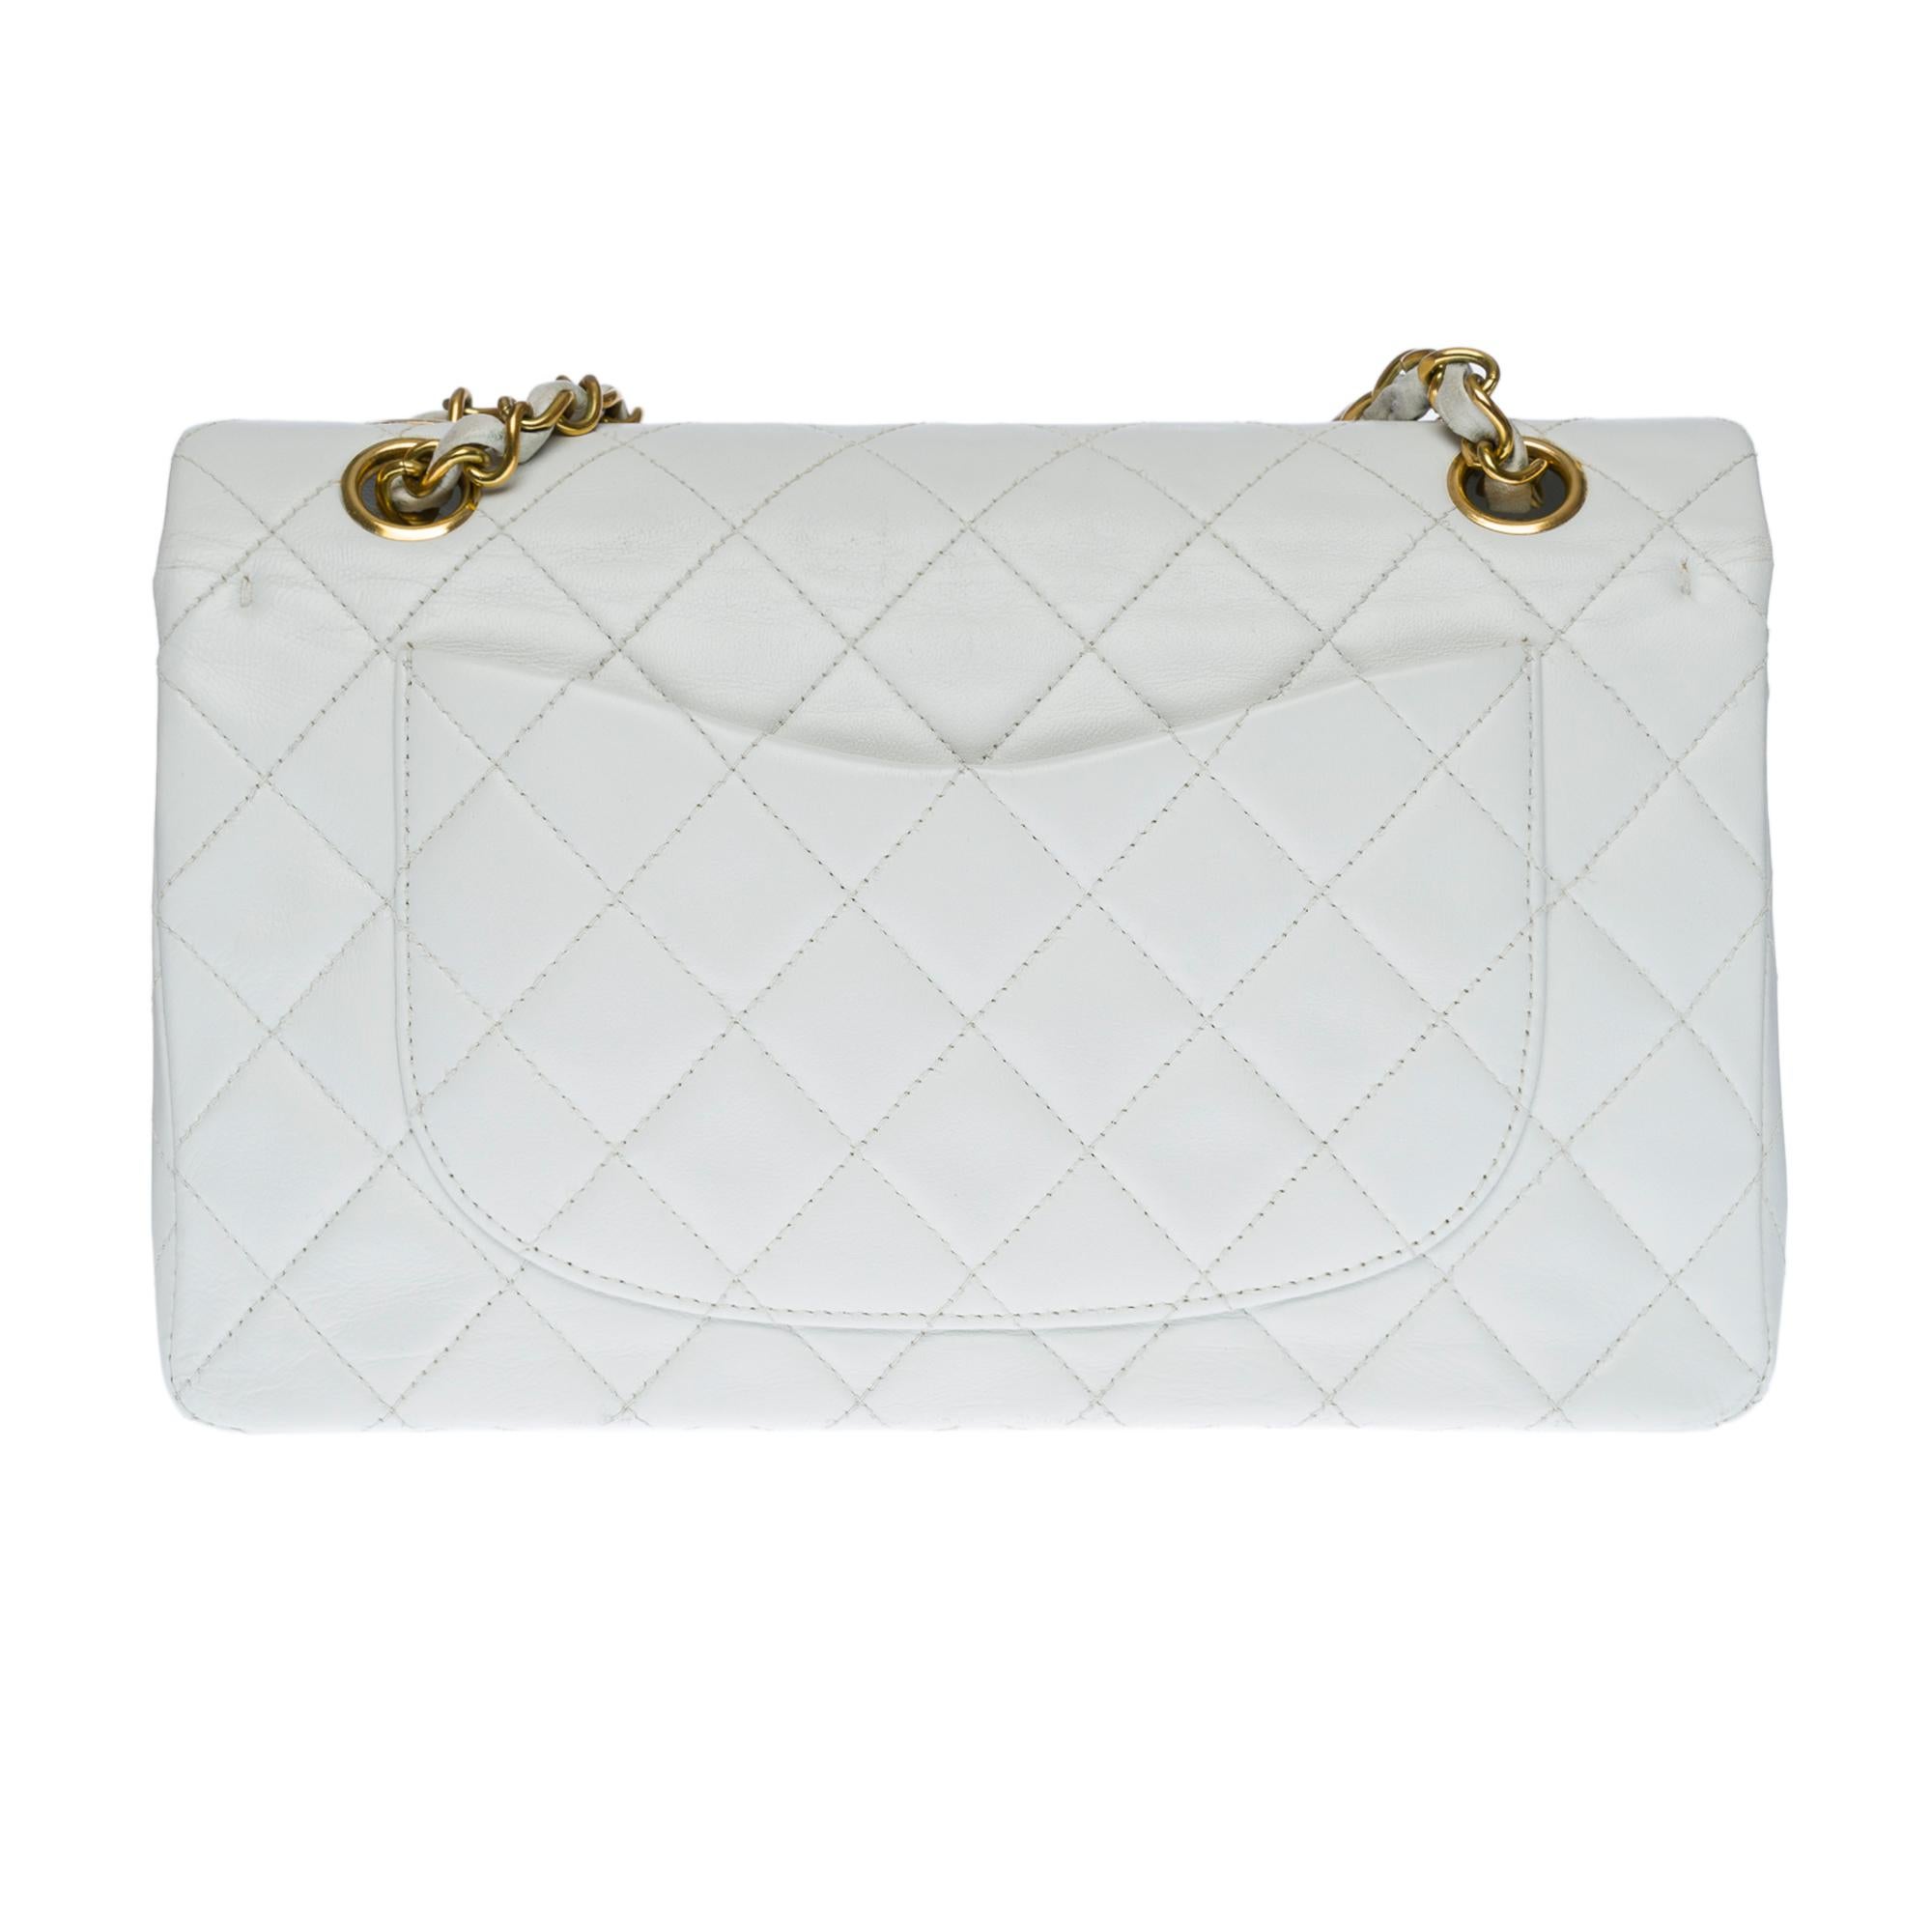 The coveted Chanel Timeless 23cm double flap shoulder bag in white quilted lambskin leather, gold metal hardware, gold metal chain intertwined with white leather for a shoulder and shoulder strap
Pocket on the back of the bag
Flap closure, gold-tone